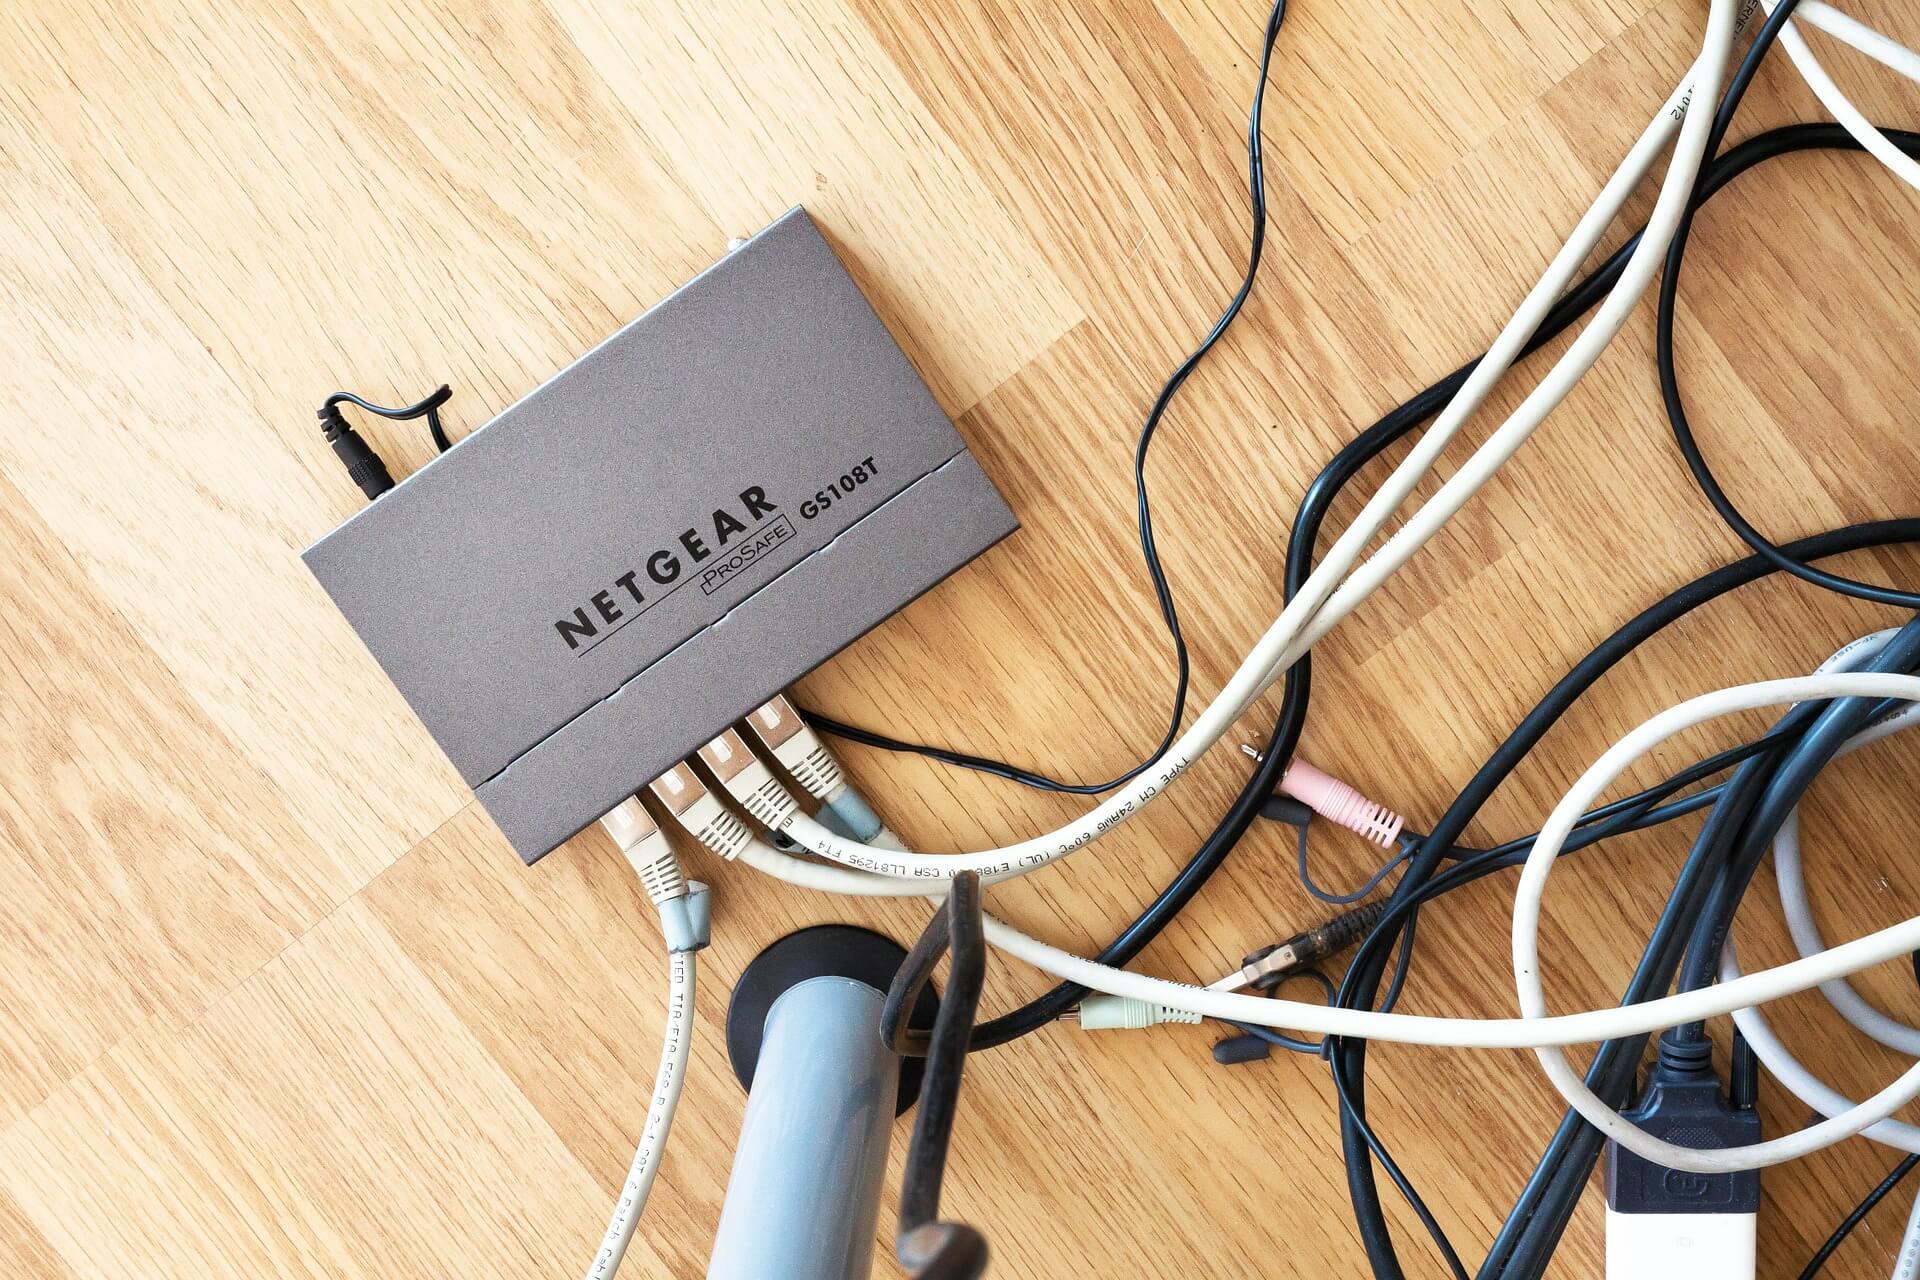 Netgear ProSafe GS108T router with 4 Ethernet cables plugged into it